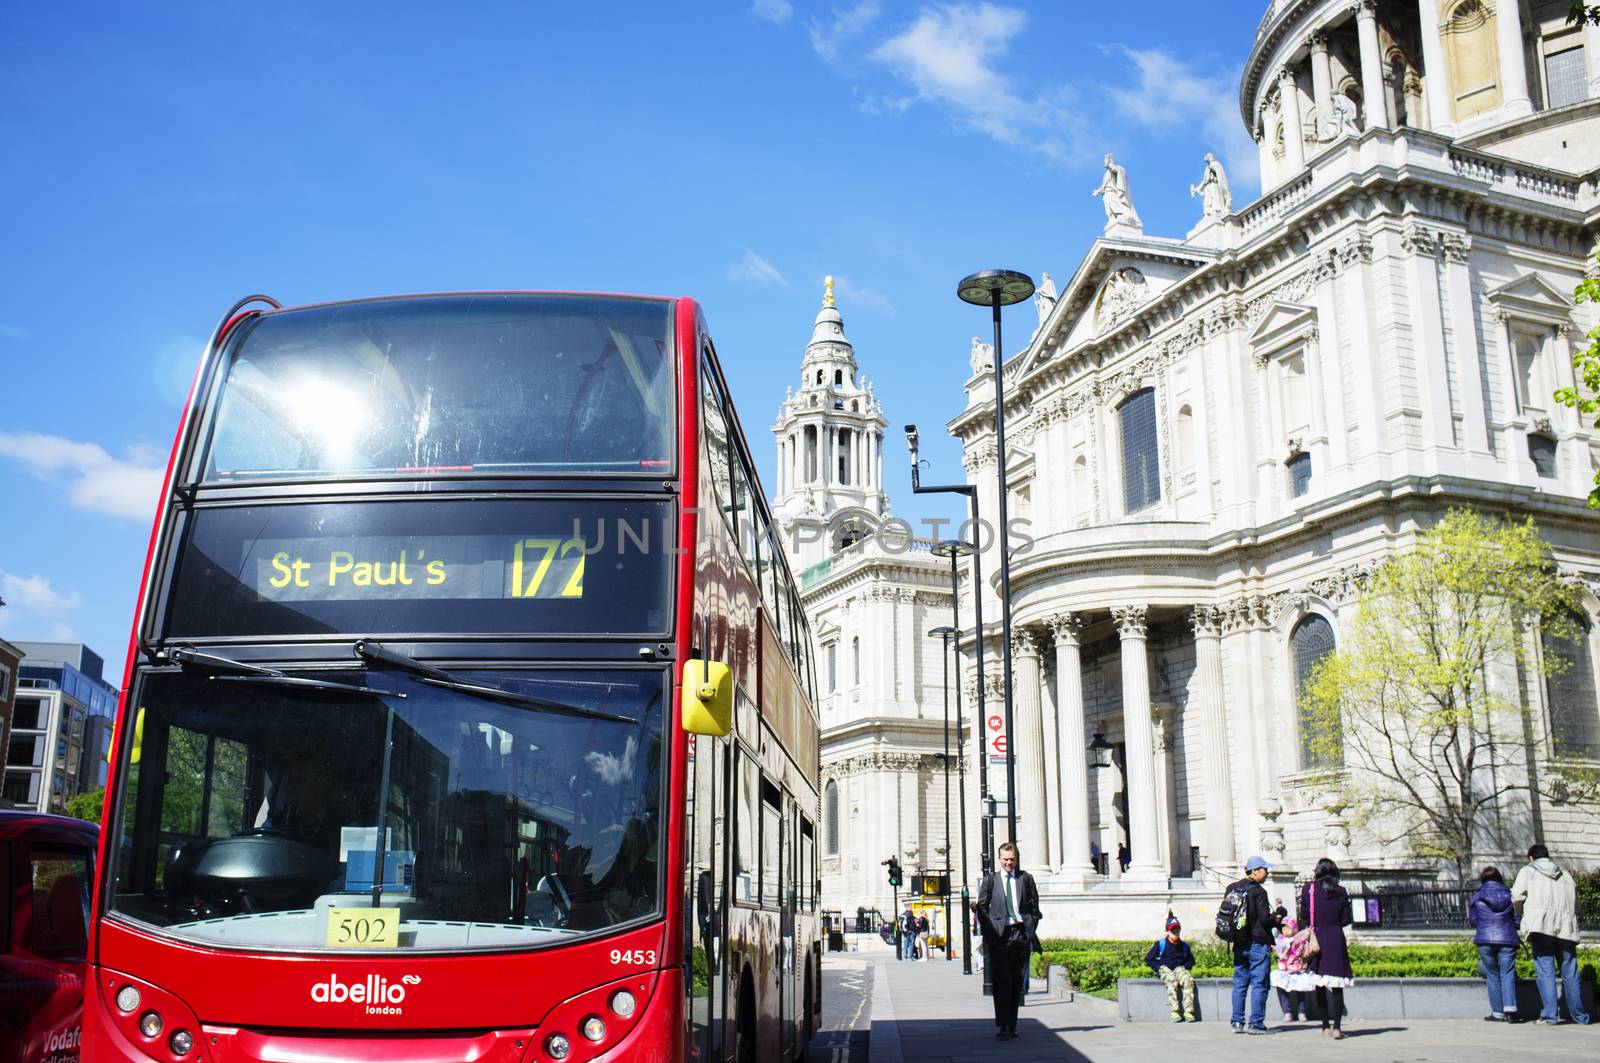 LONDON, UK – APRIL 15, 2014: Double-decker bus in front of Saint Paul's Cathedral.